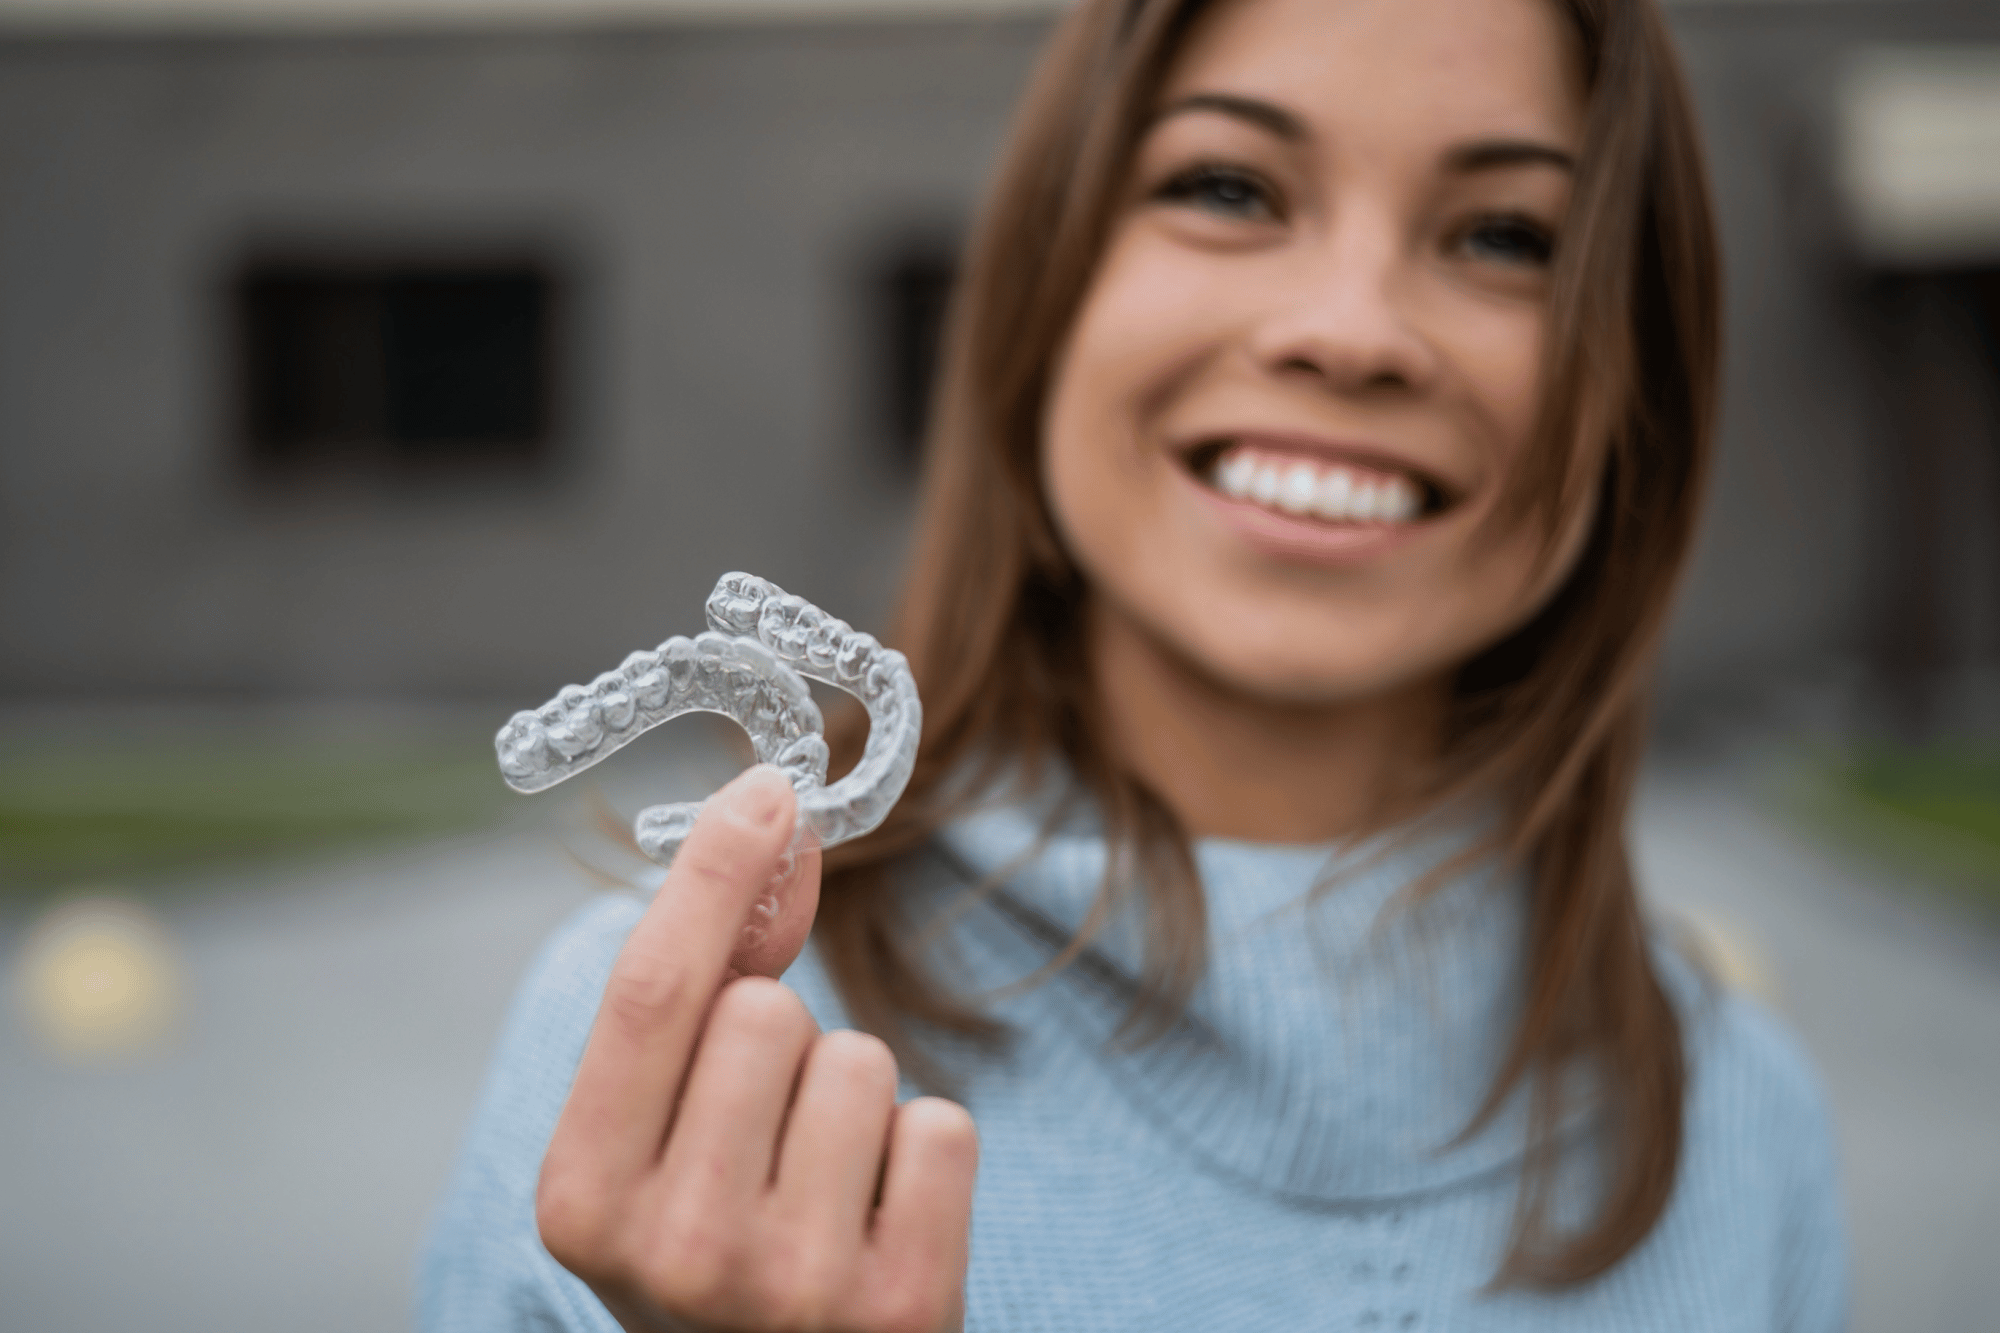 Get a Confident Smile With Invisalign From Chad Latino DDS